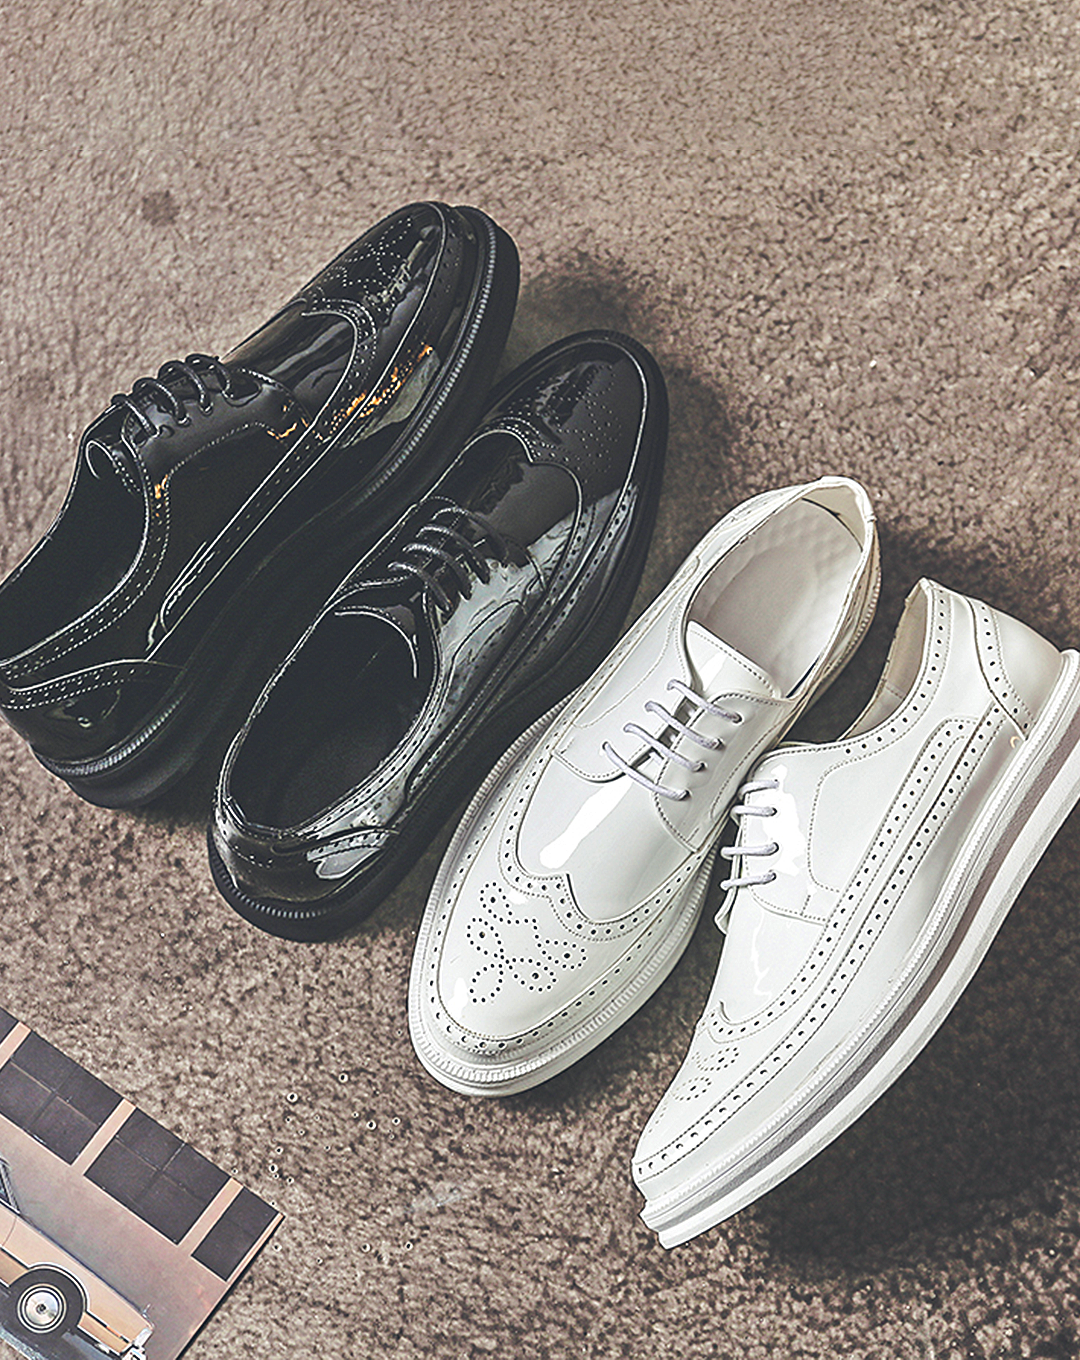 ♂♀Medallion Oxford Shoes